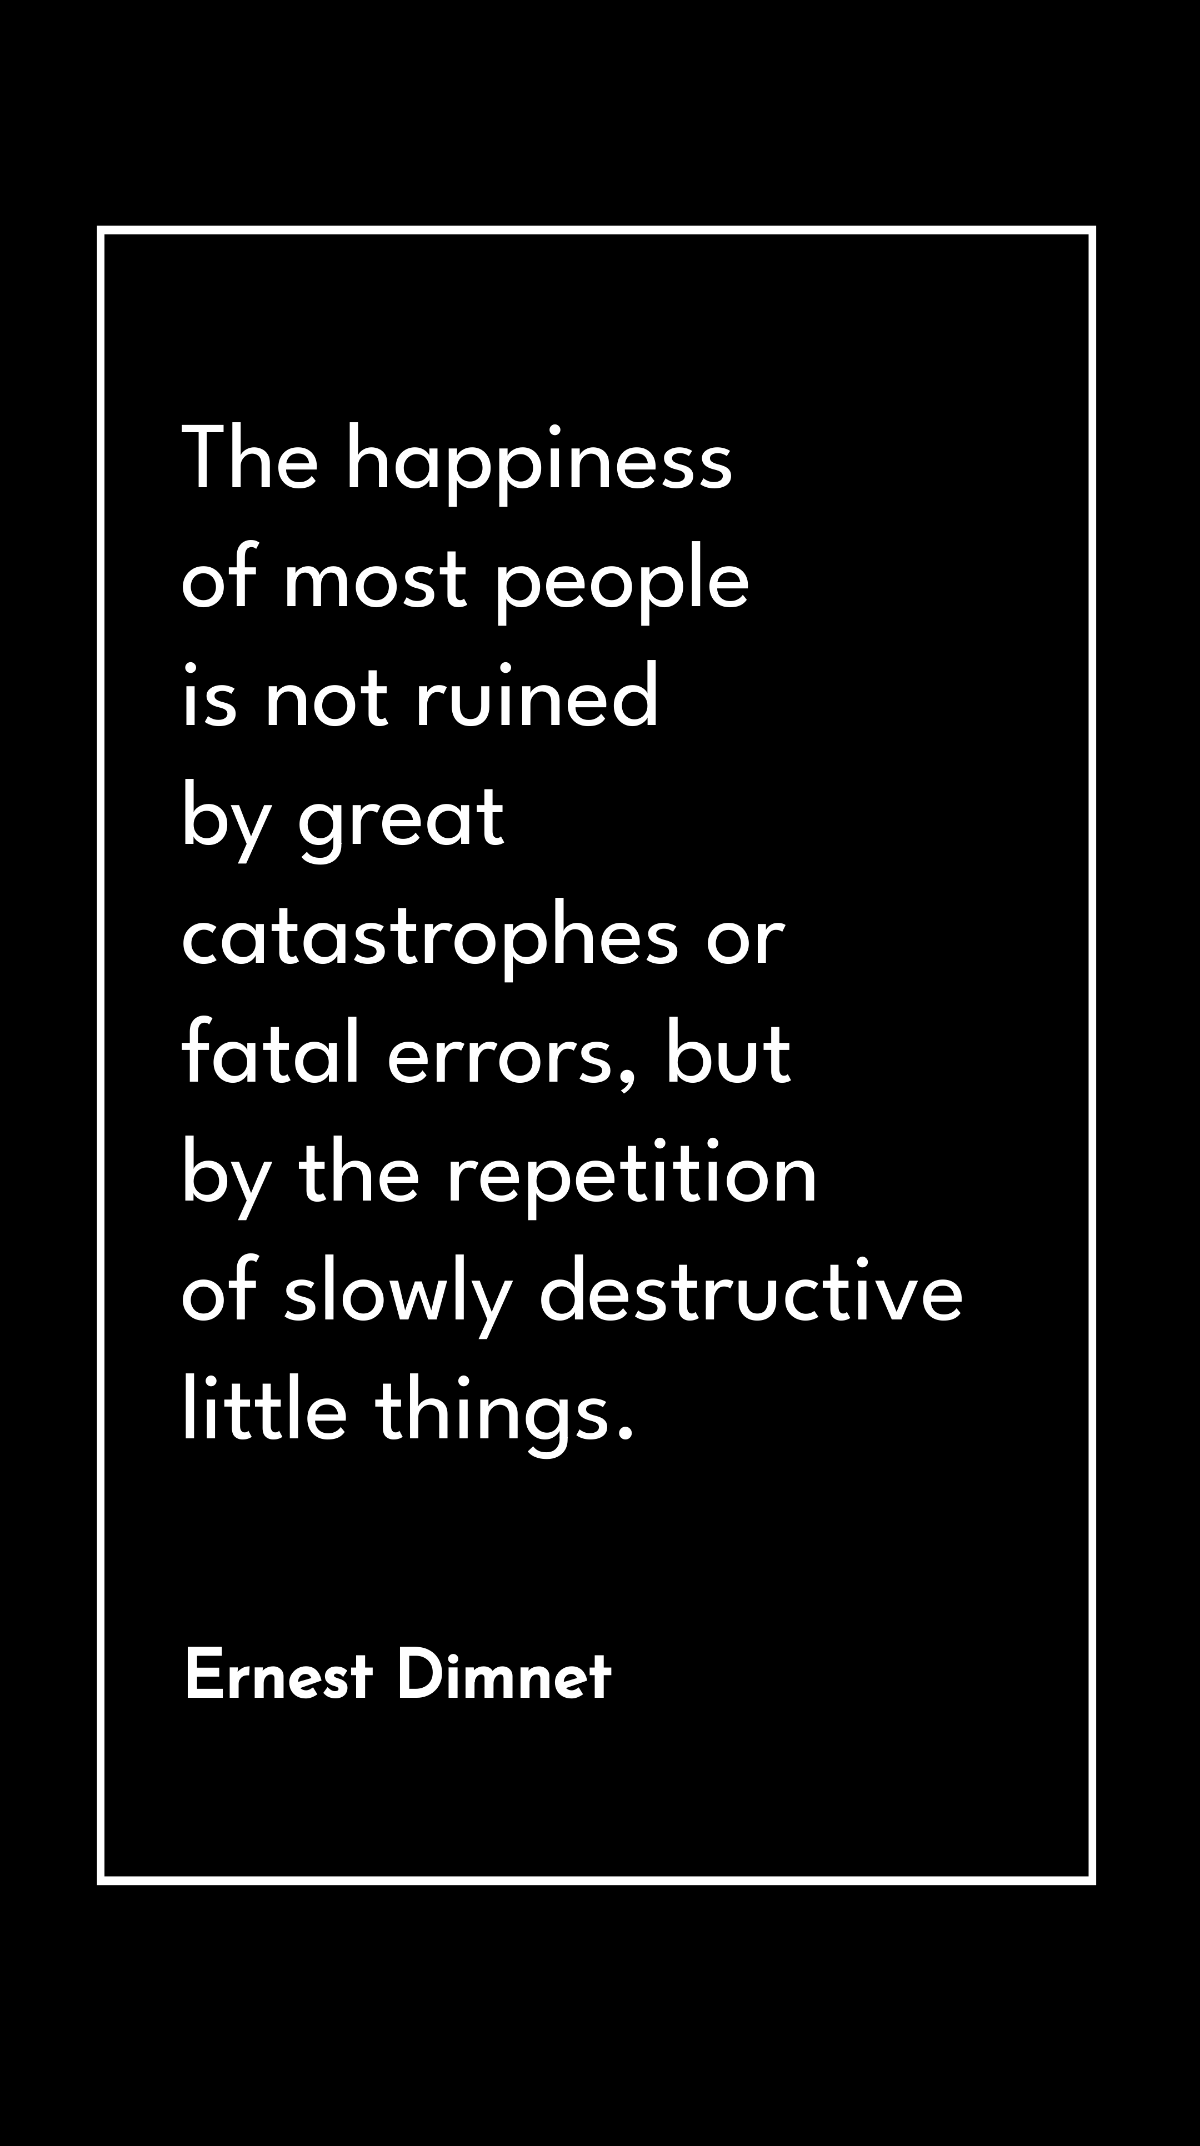 Ernest Dimnet - The happiness of most people is not ruined by great catastrophes or fatal errors, but by the repetition of slowly destructive little things. Template